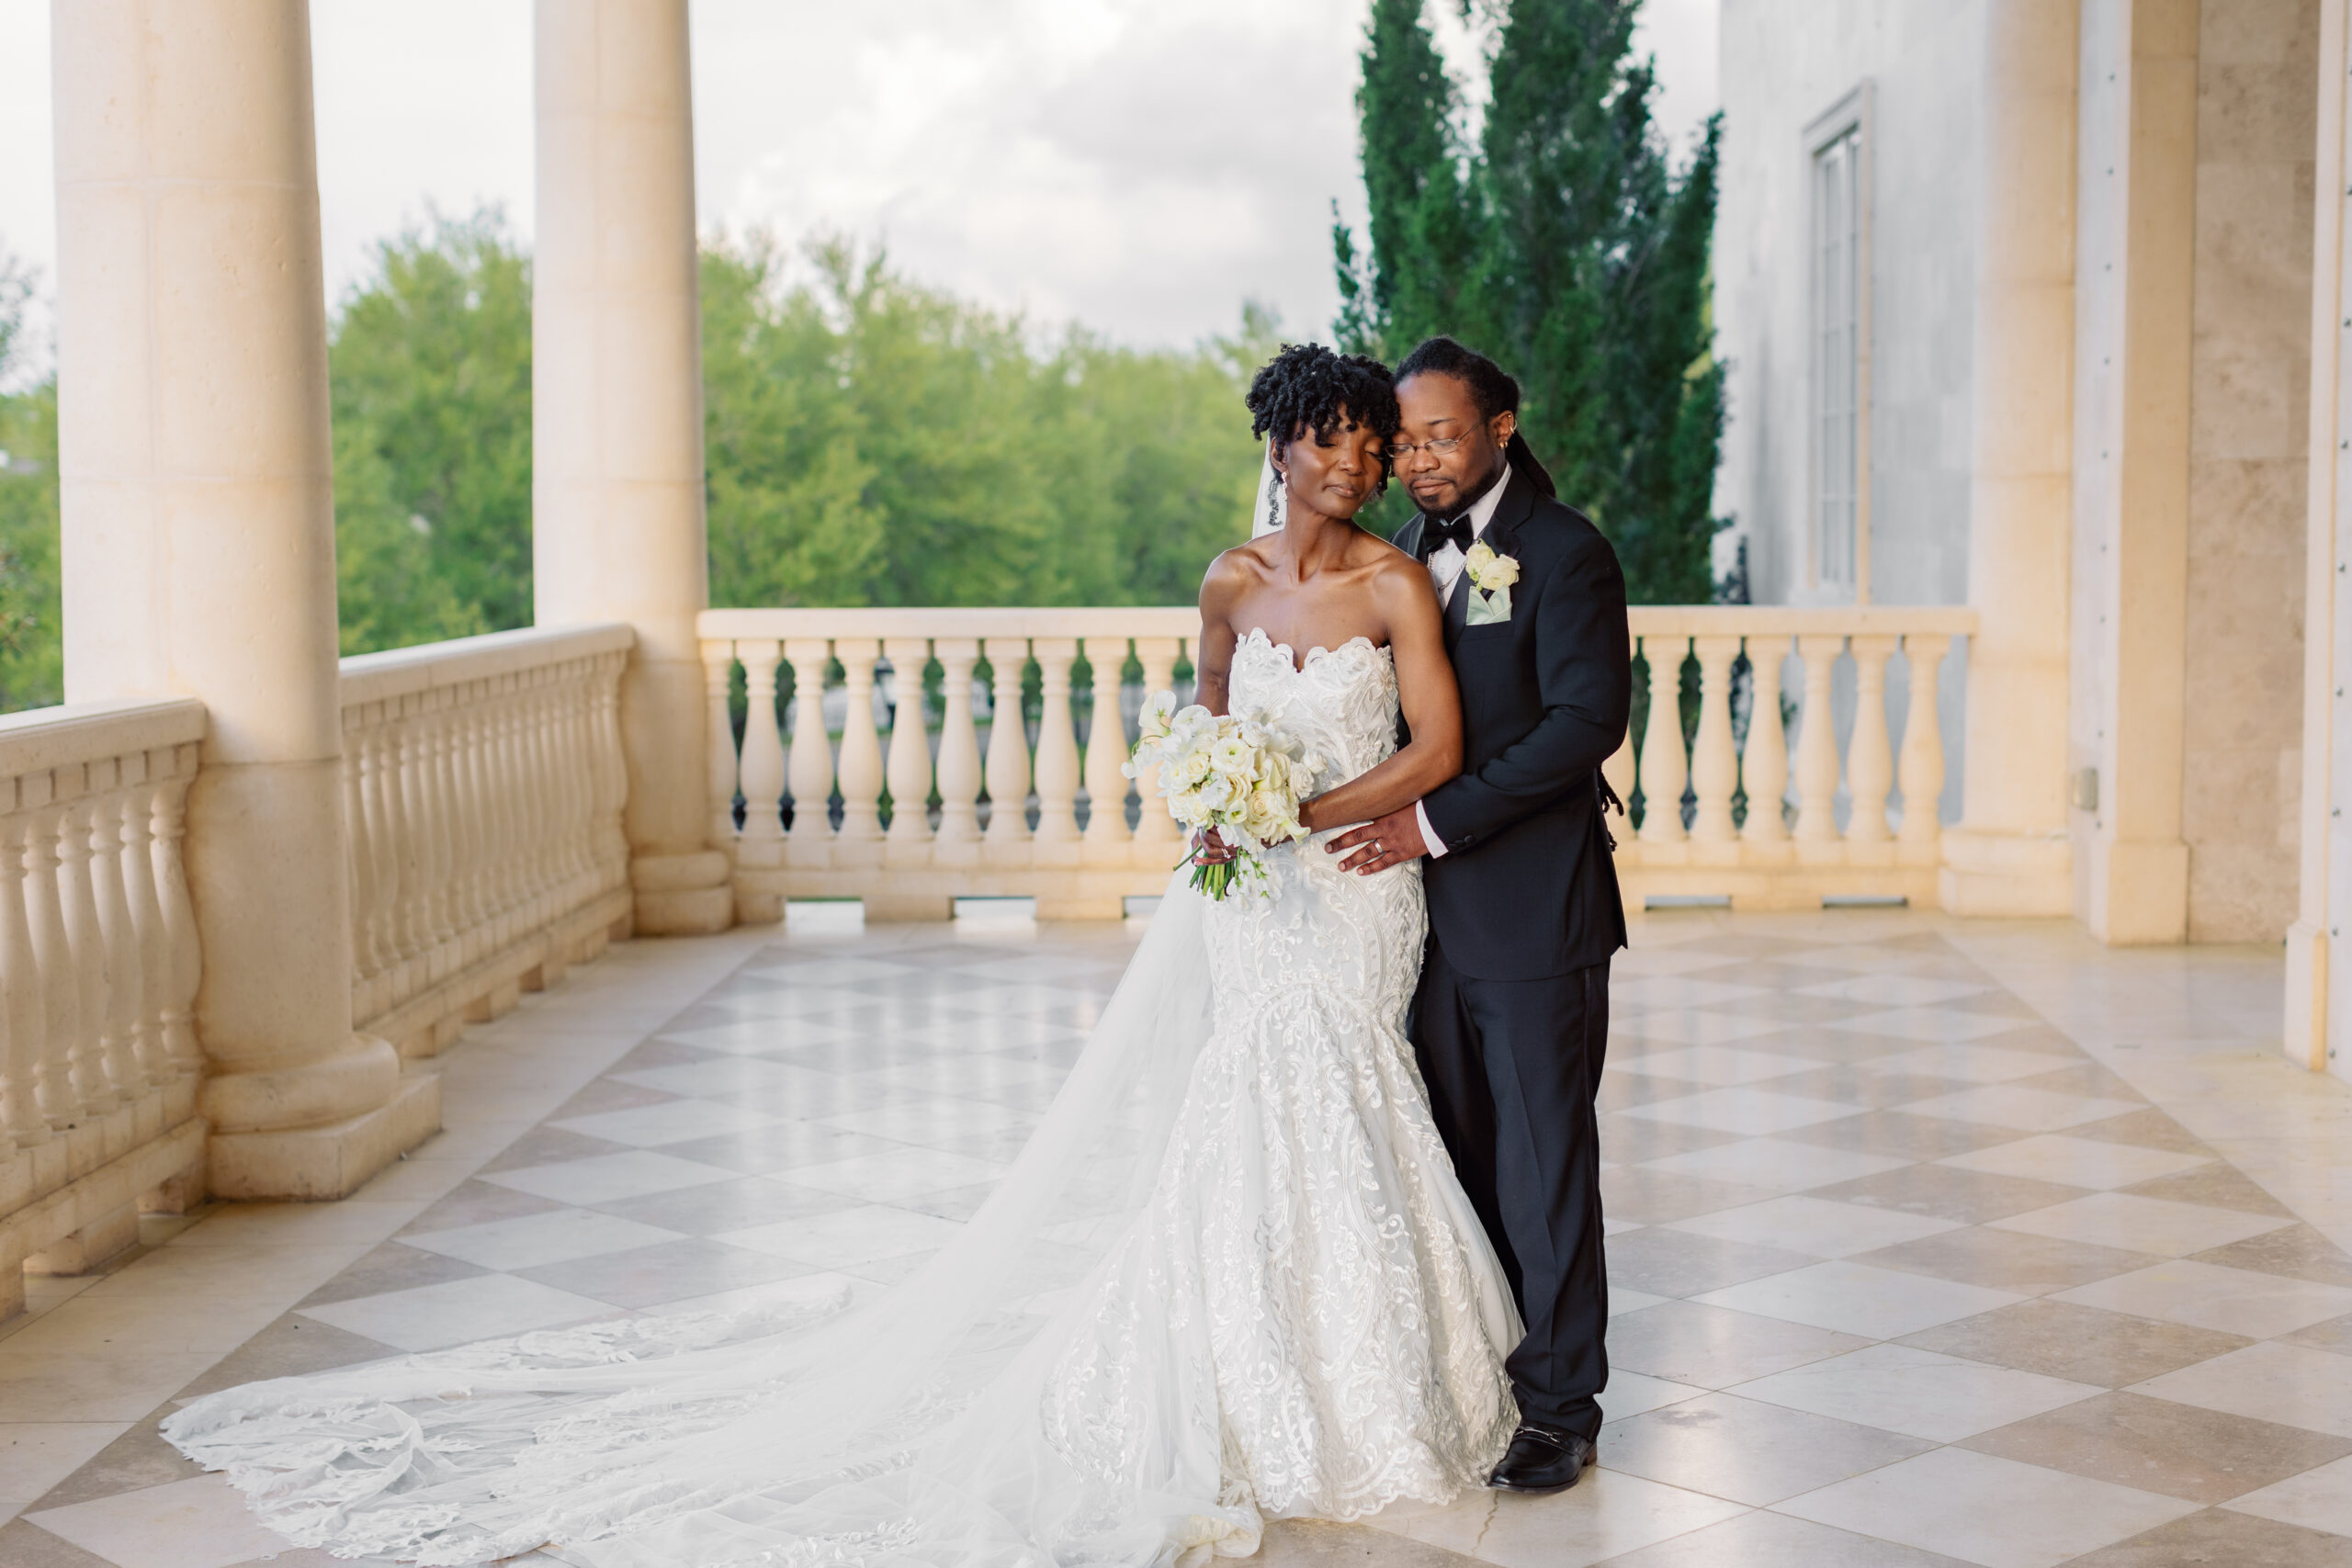 Michelle and Deondre, the newlywed couple, embracing on the veranda of their wedding venue at The Regent. Michelle wears a white gown with intricate details, a long train, and a veil, holding her bouquet. Deondre is in a black tux.